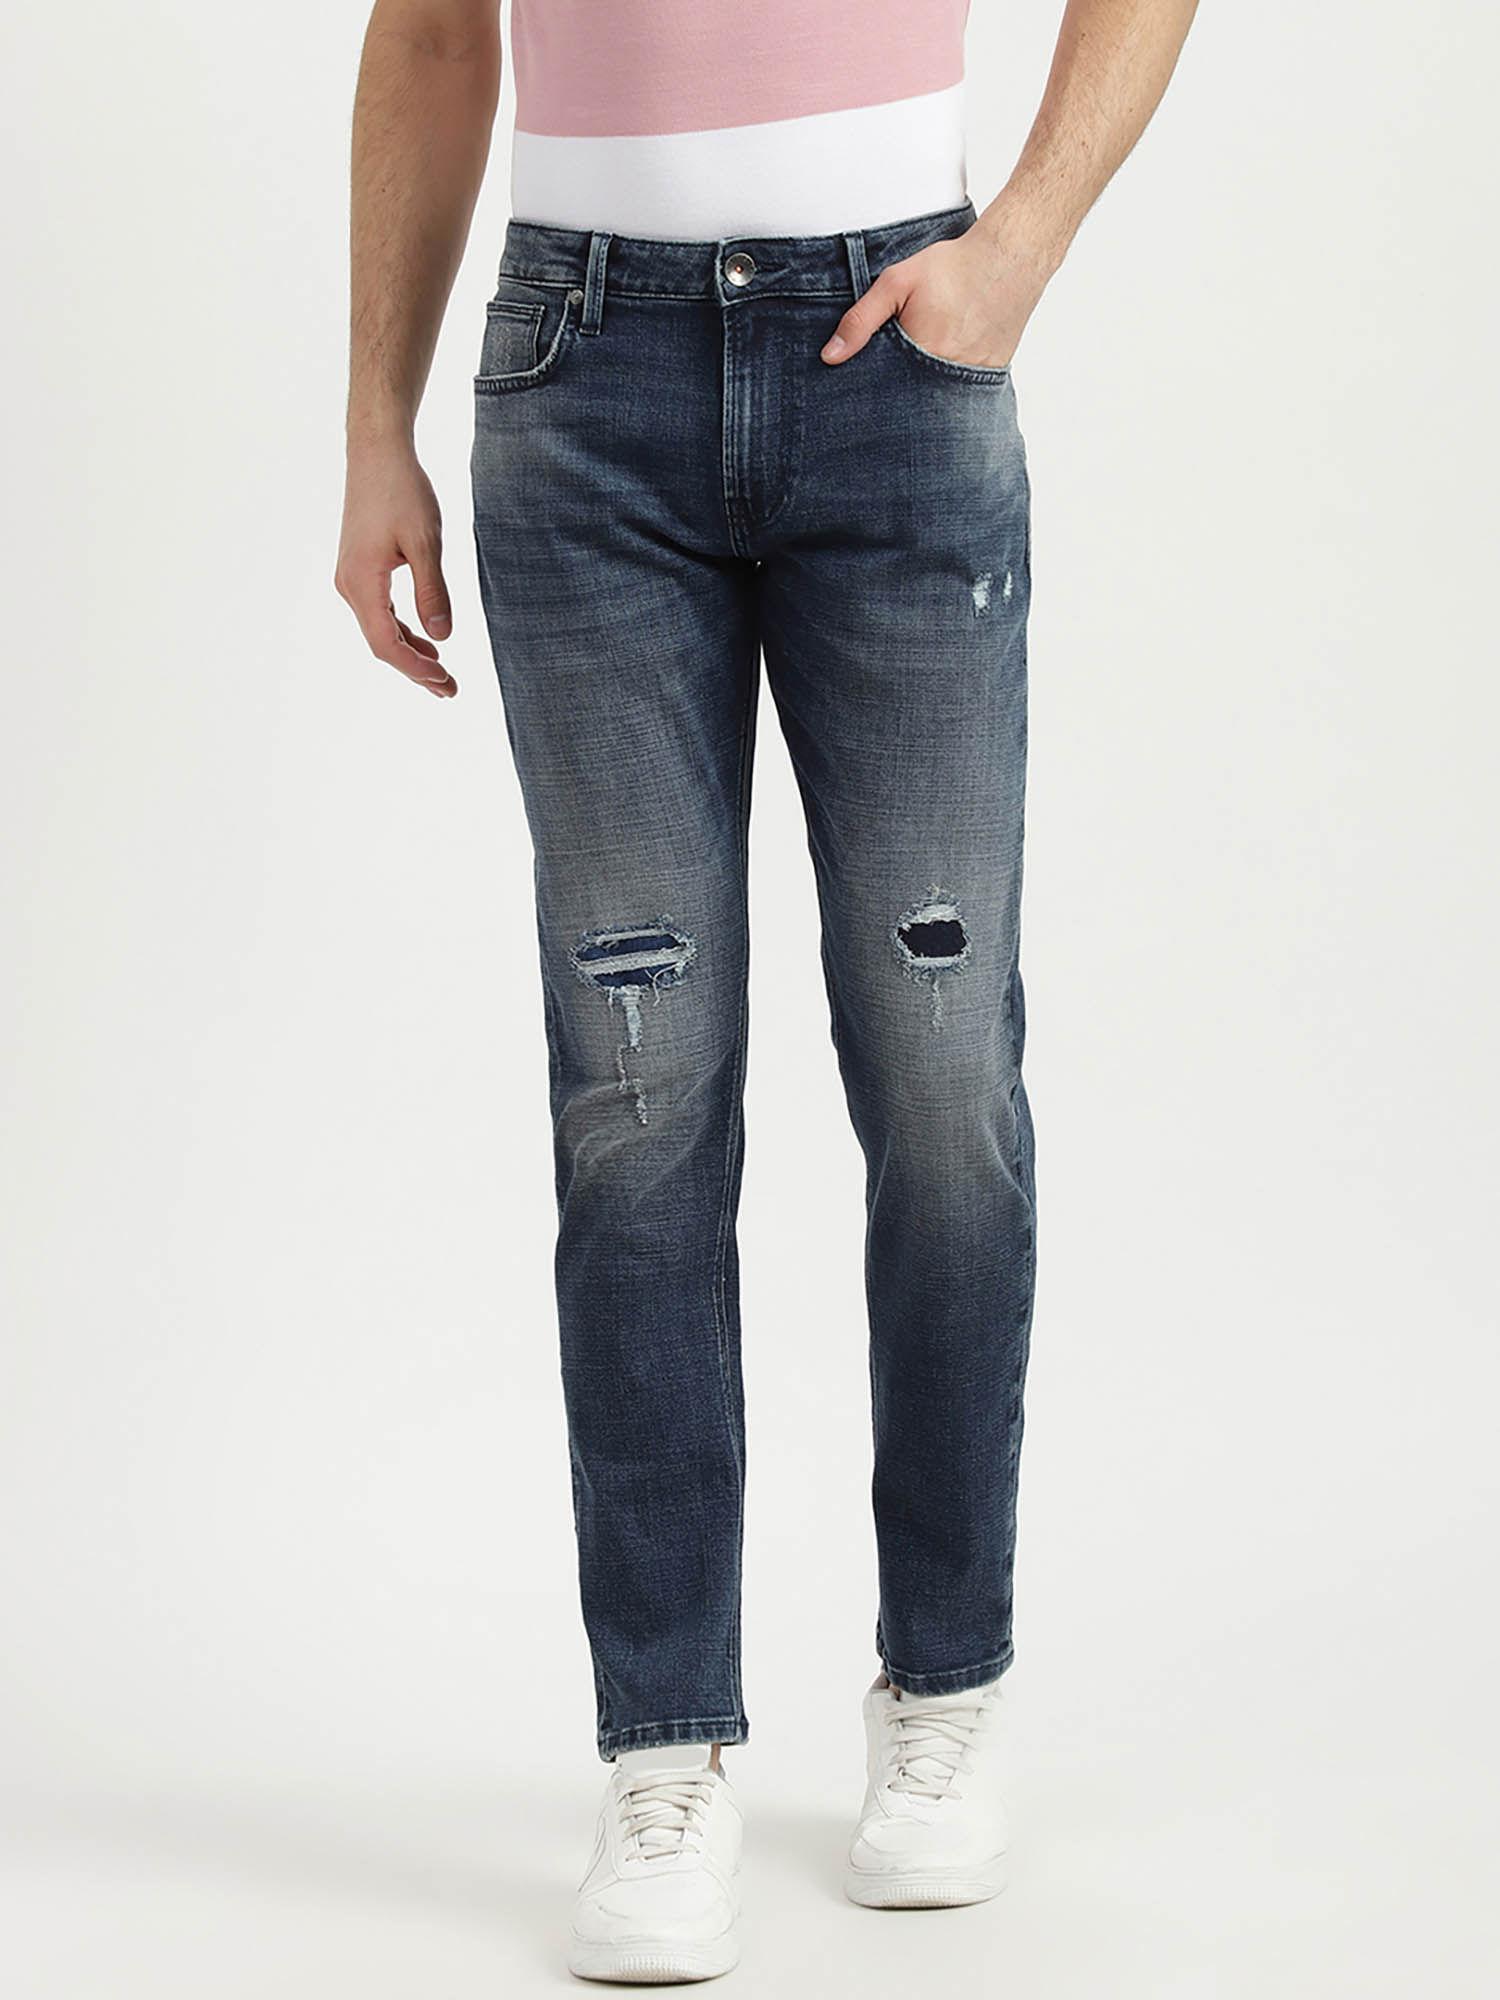 mens-carrot-fit-jeans